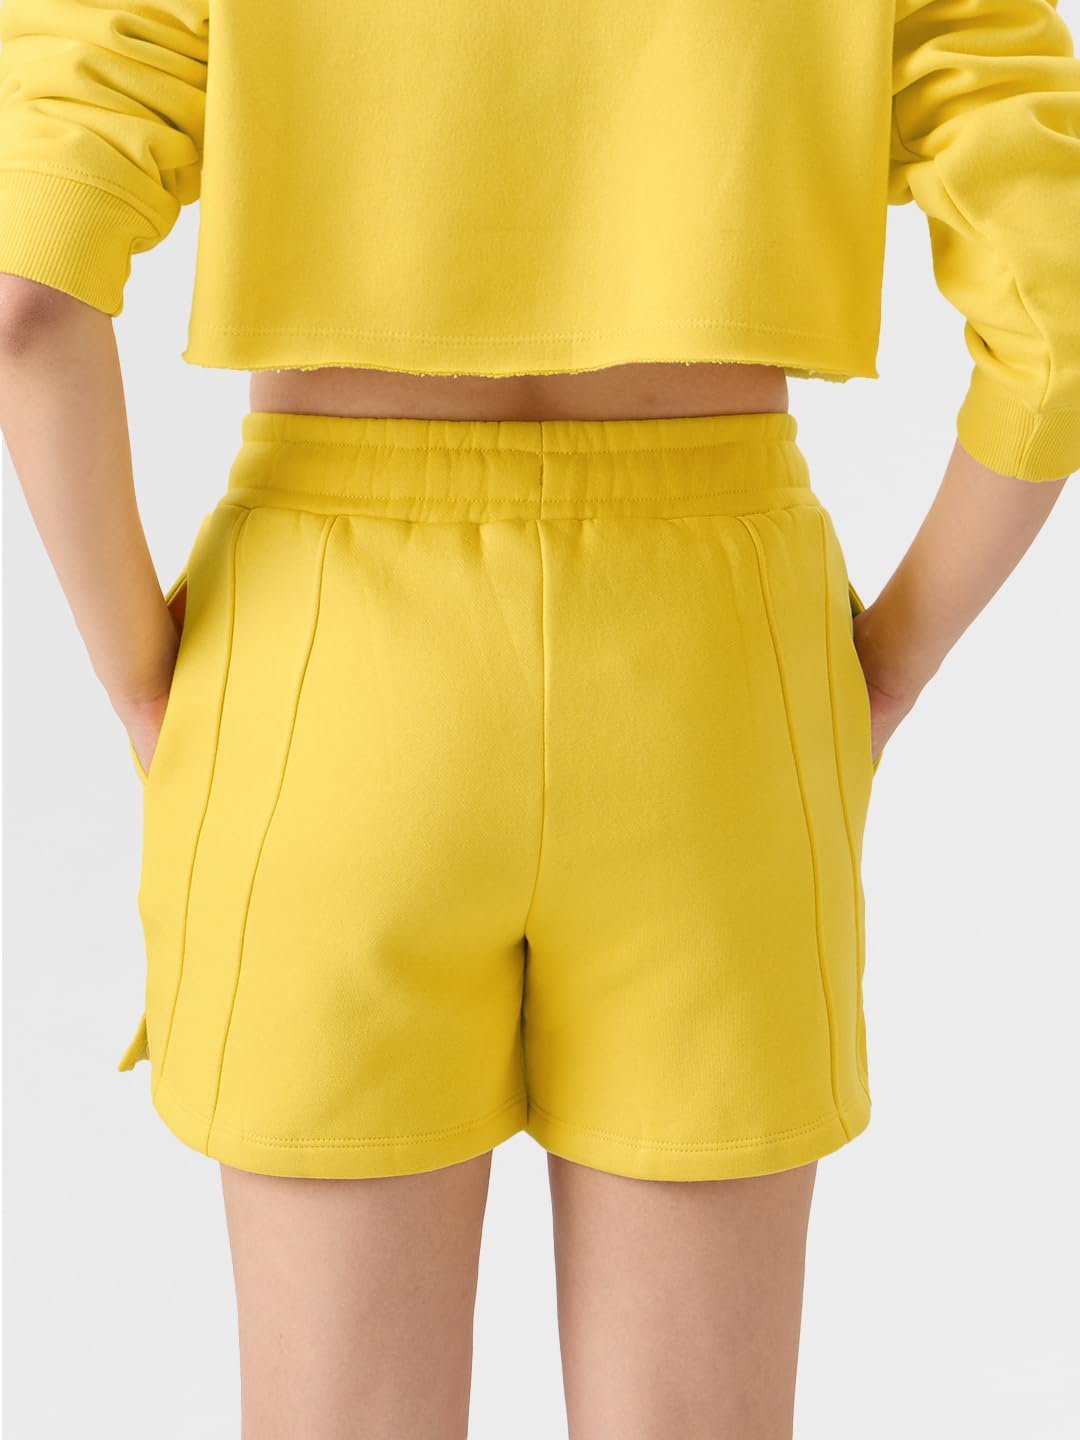 The Souled Store Amber Women Regular Fit Solid Yellow Color Cotton and Polyester Lounge Shorts SweatShorts Women's Sweat Shorts Athletic Lounge Gym Running Workout French Terry Cotton Drawstring